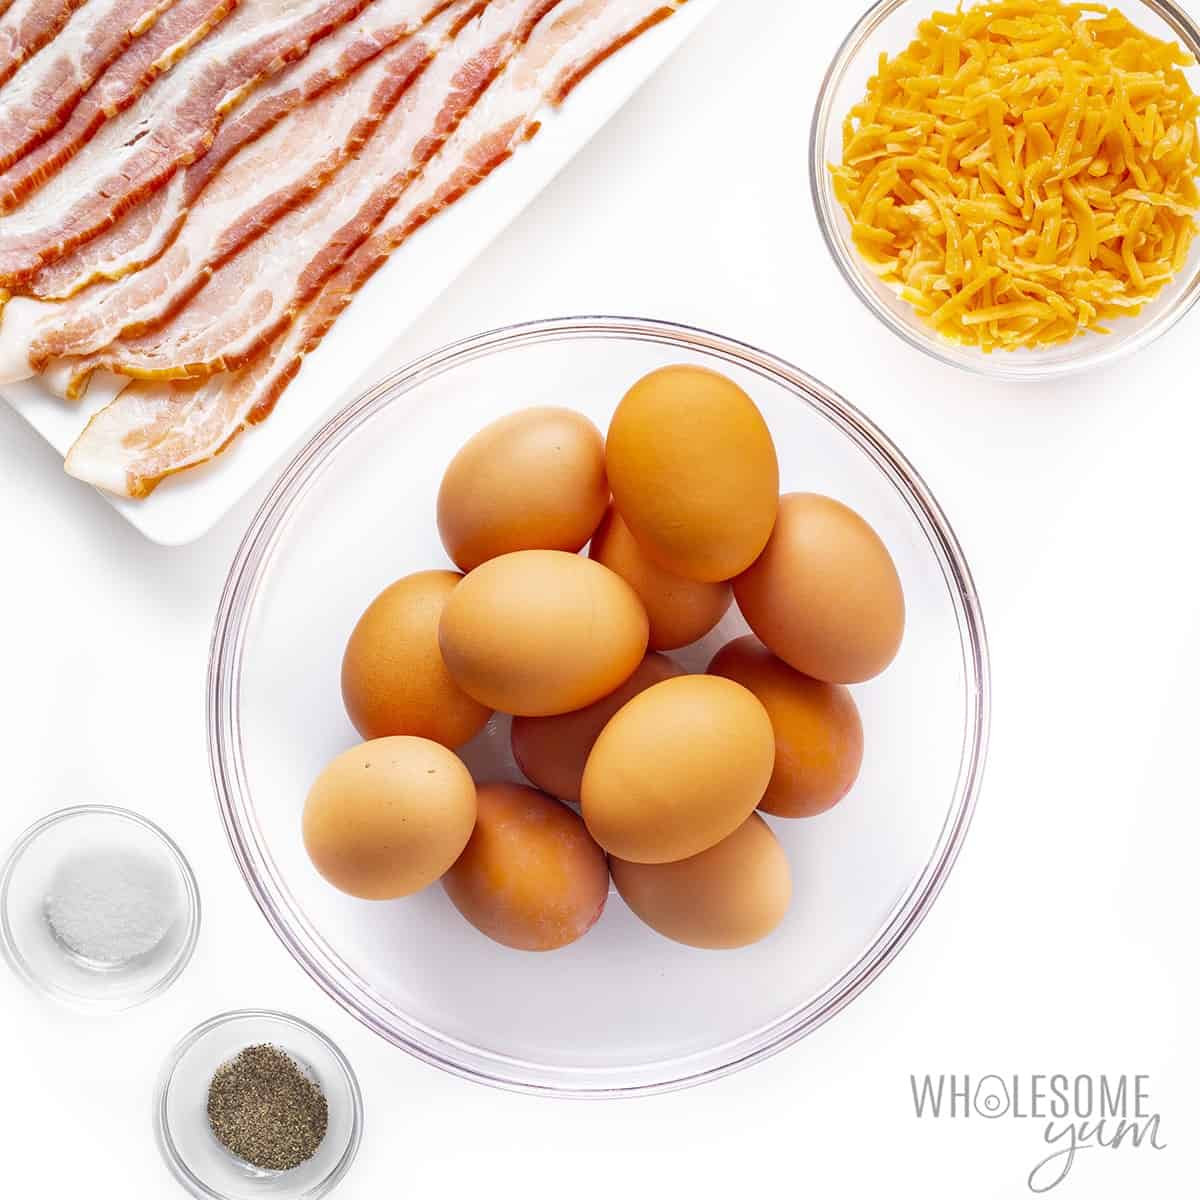 Ingredients to make bacon baked eggs in a muffin tin.